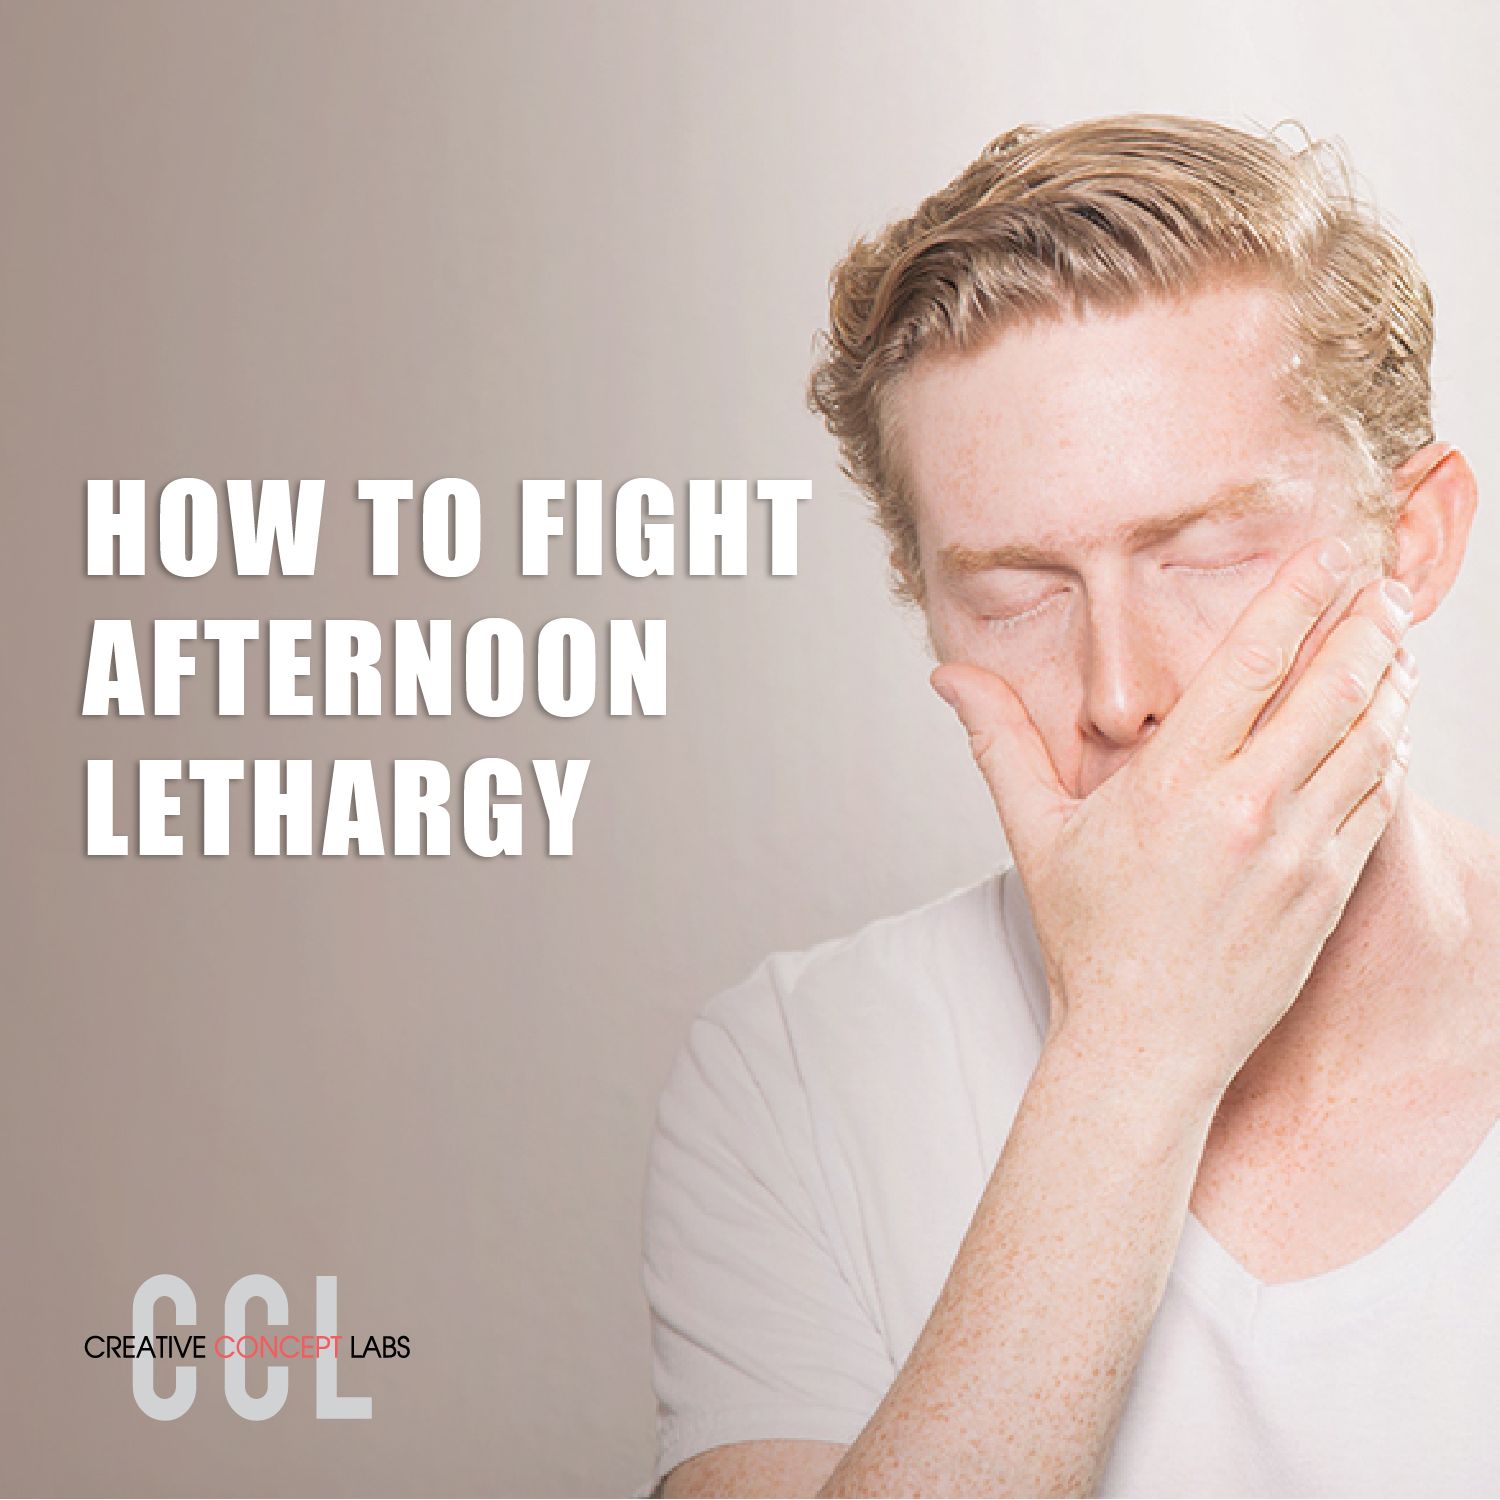 How to Fight Afternoon Lethargy